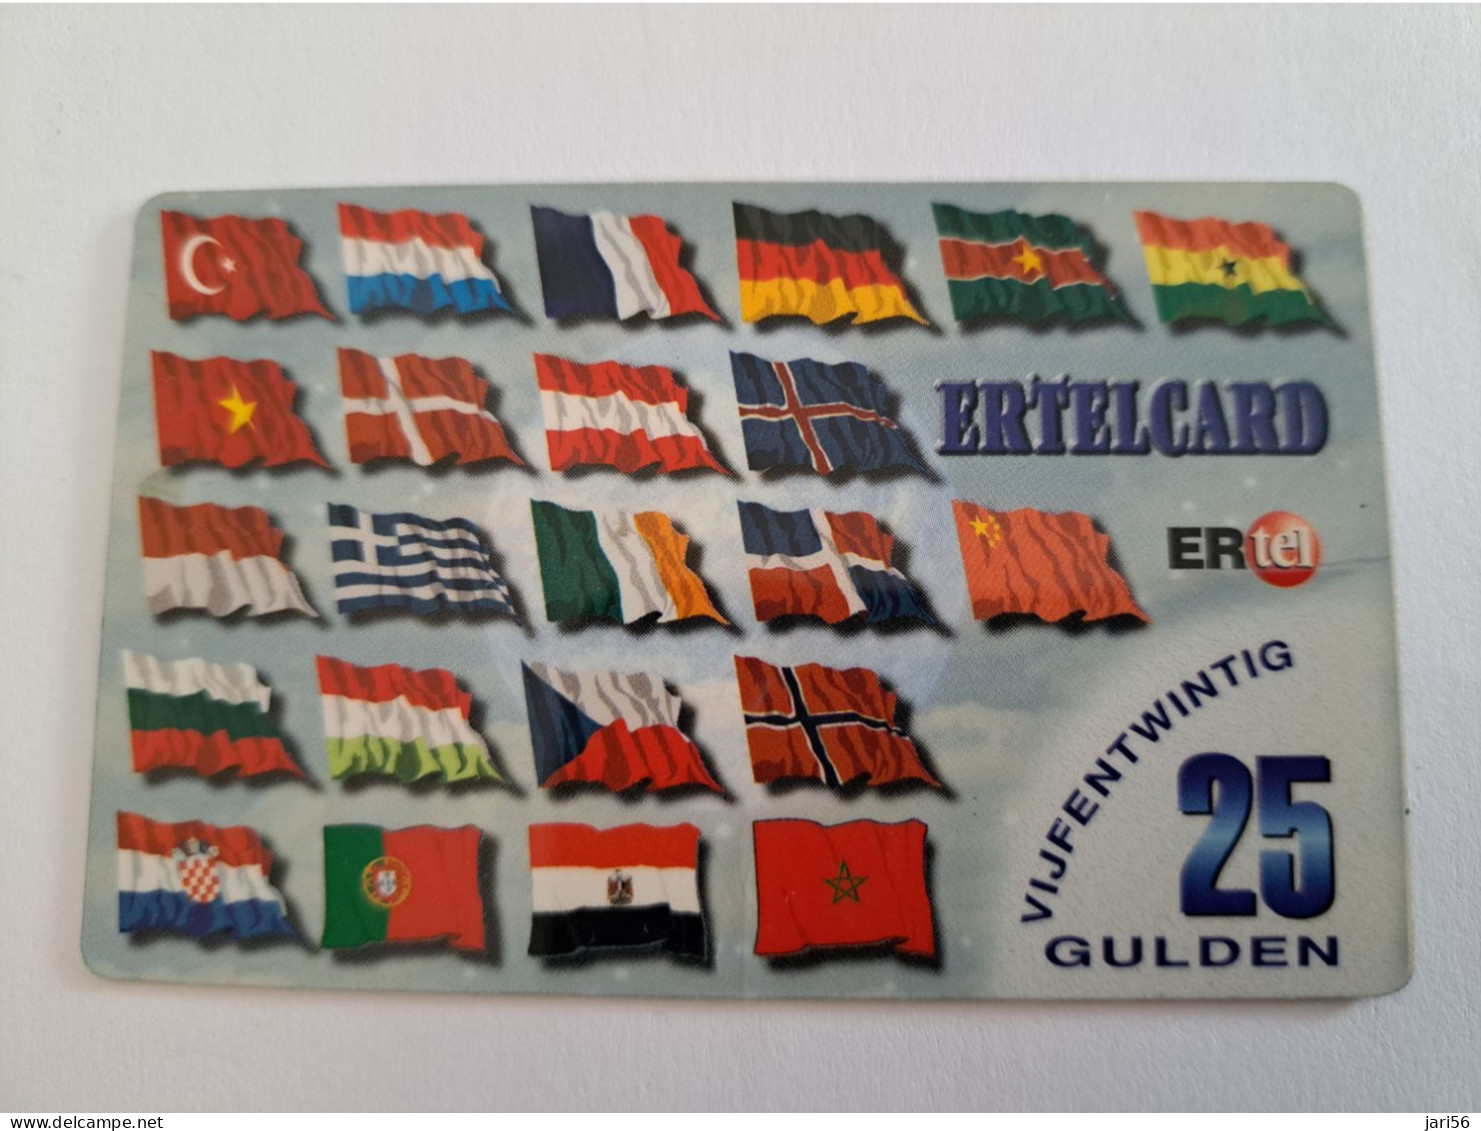 NETHERLANDS/ PREPAID/  HFL 25,- /FLAGS OF THE DIFFERENT COUNTRYS/   - USED CARD  ** 13938** - Cartes GSM, Prépayées Et Recharges